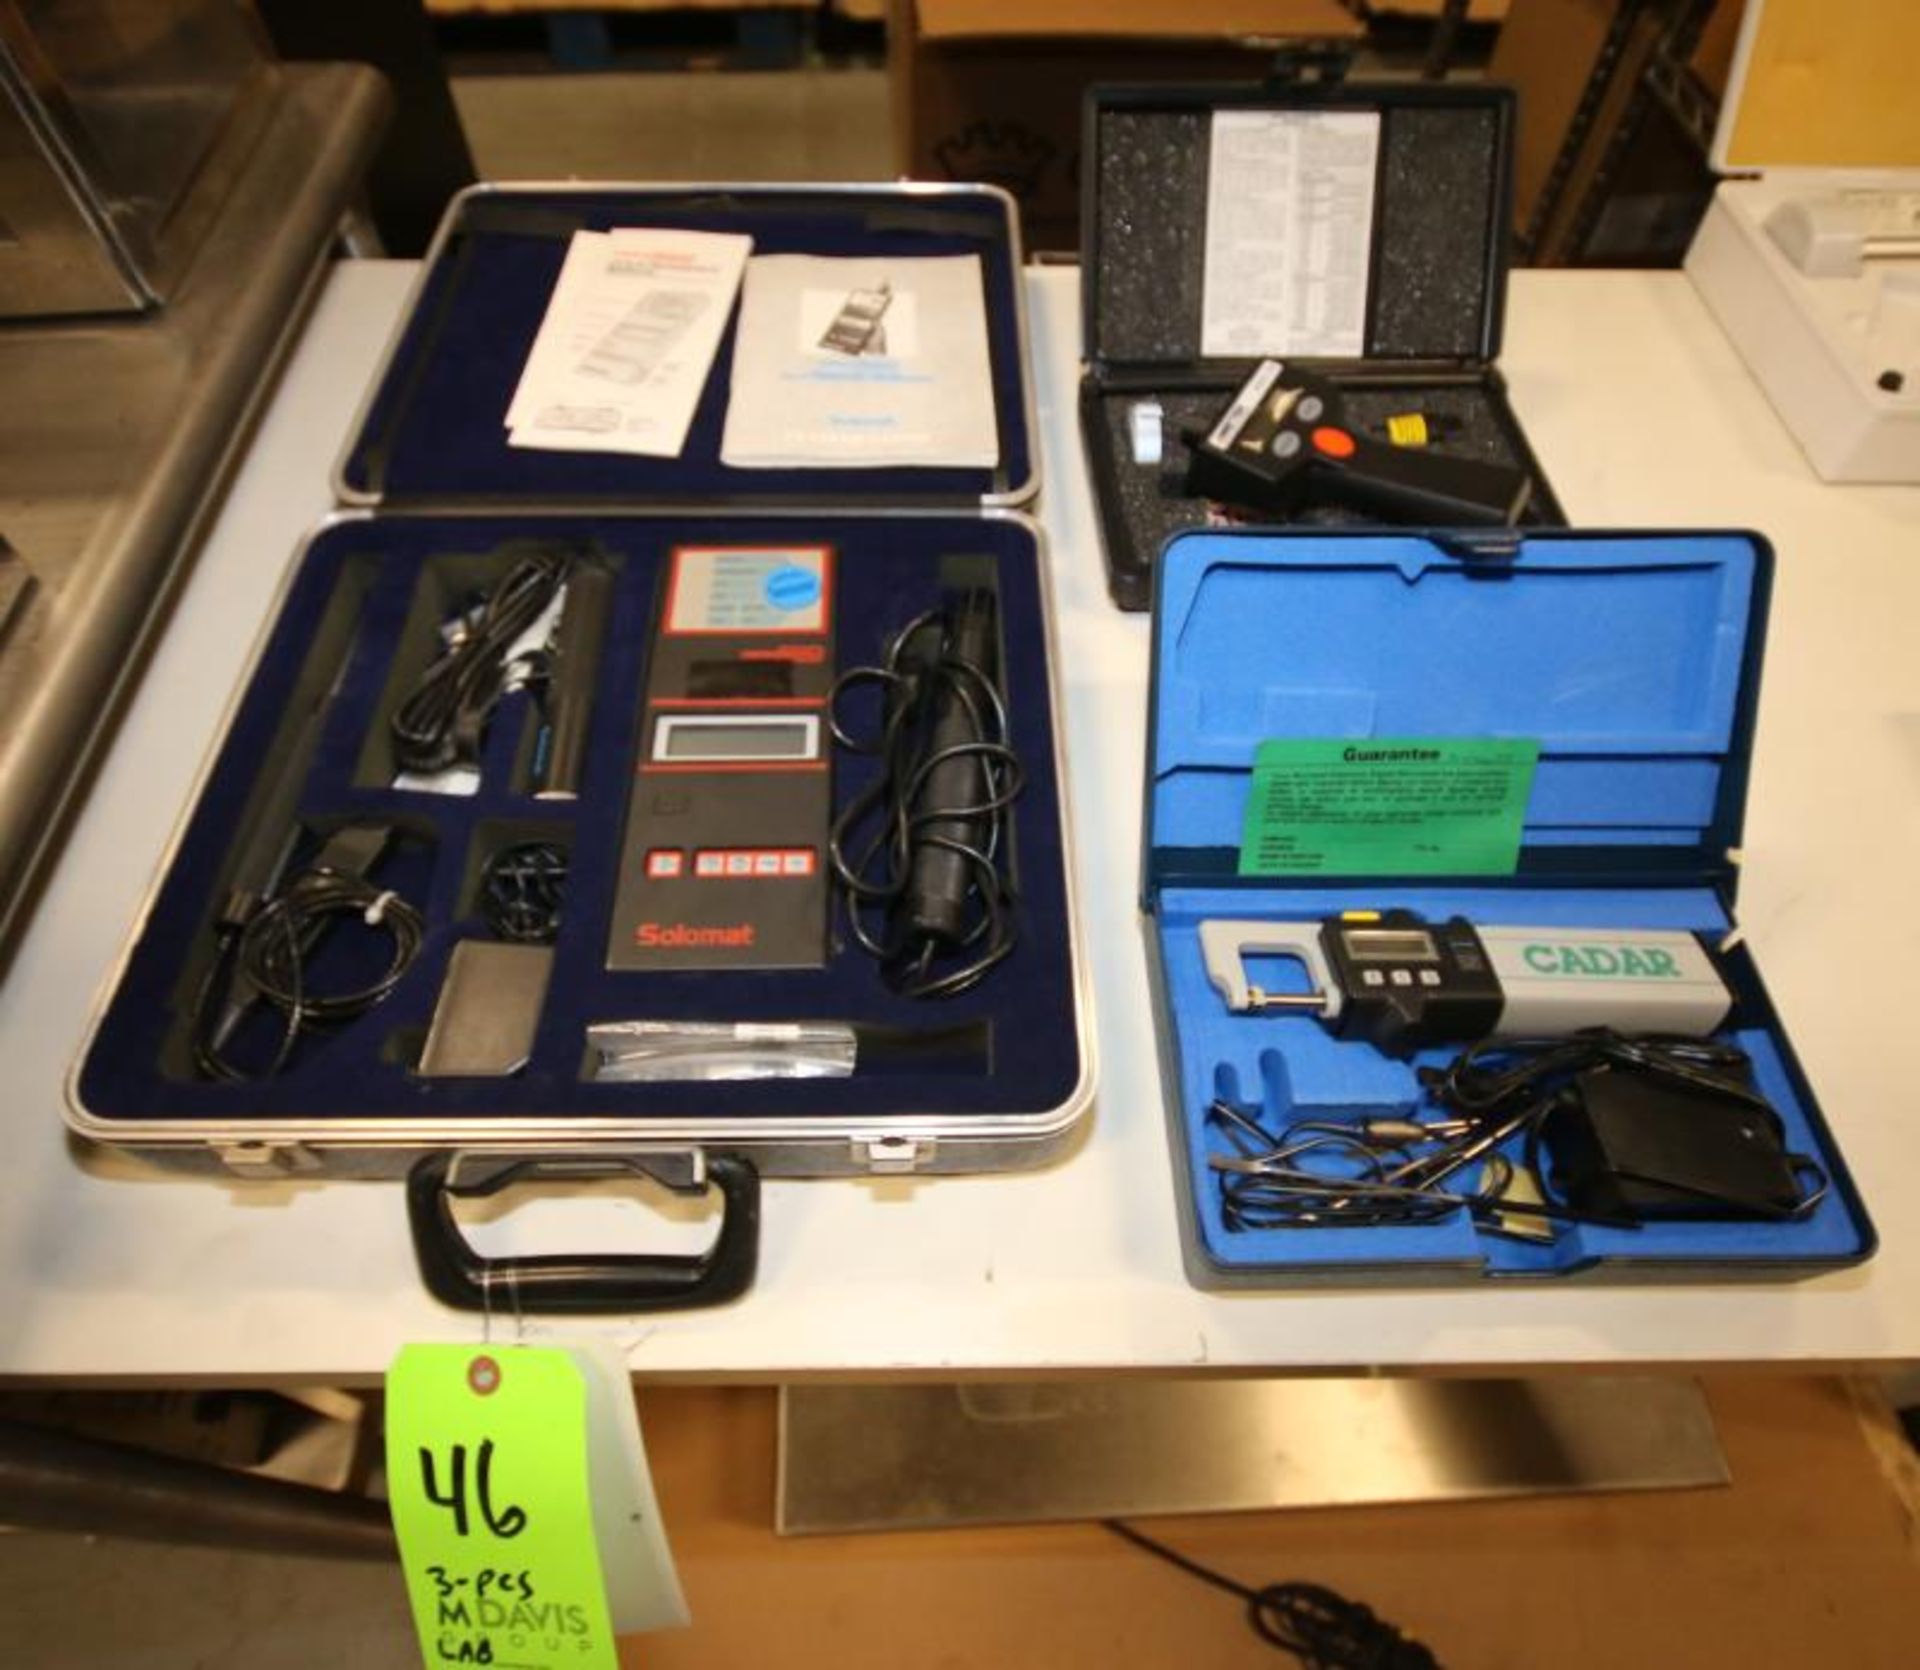 Lot of (3) Assorted Hand Held Testers Including Cadar Microstat Digital Micrometer, Solomat MP500e